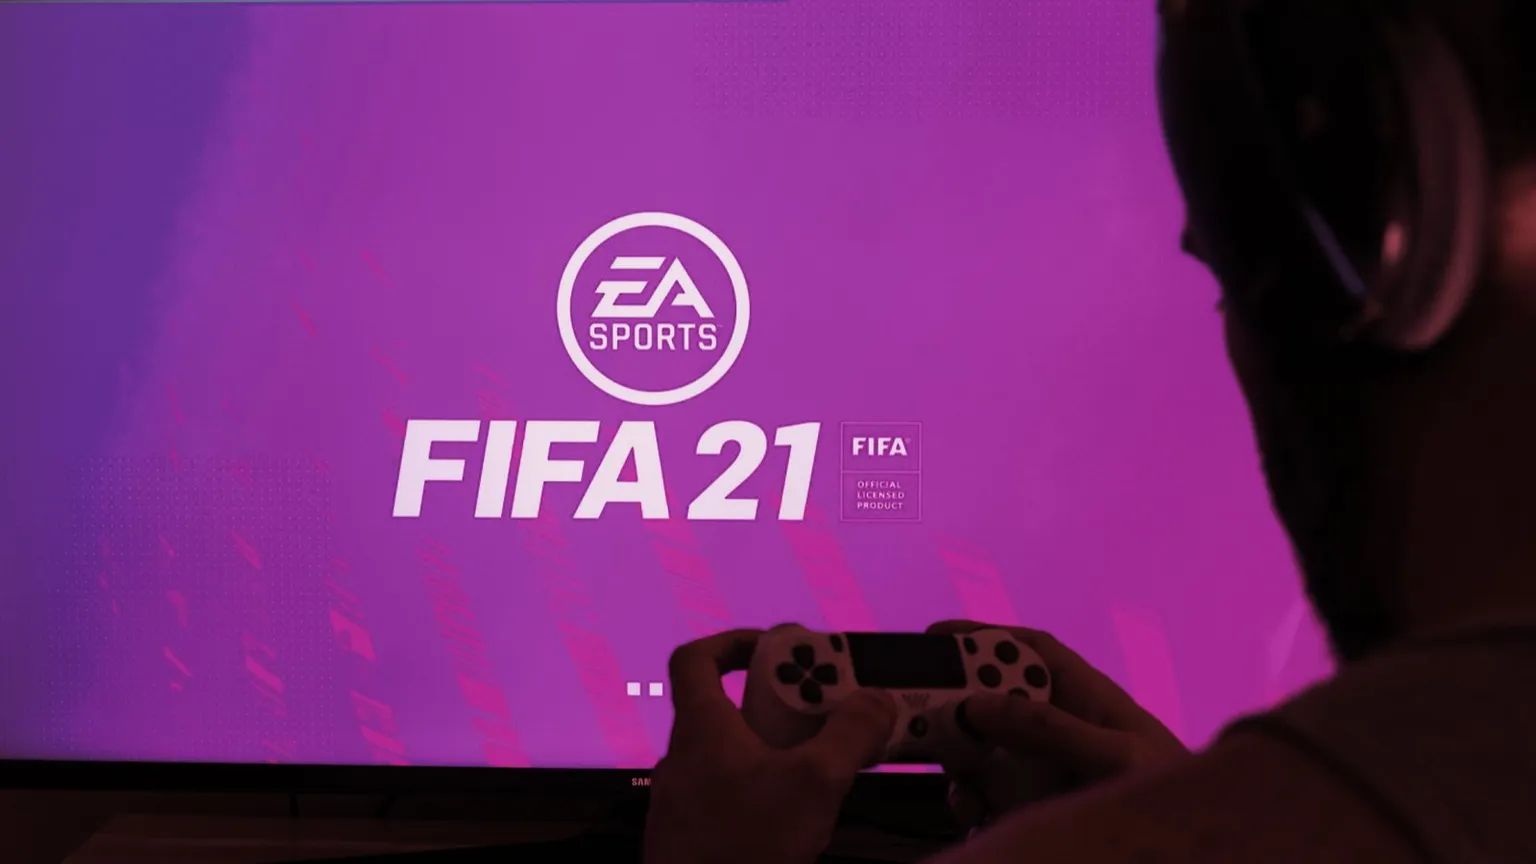 FIFA 2021 is an extremely popular soccer video game published by Electronic Arts. Image: Shutterstock